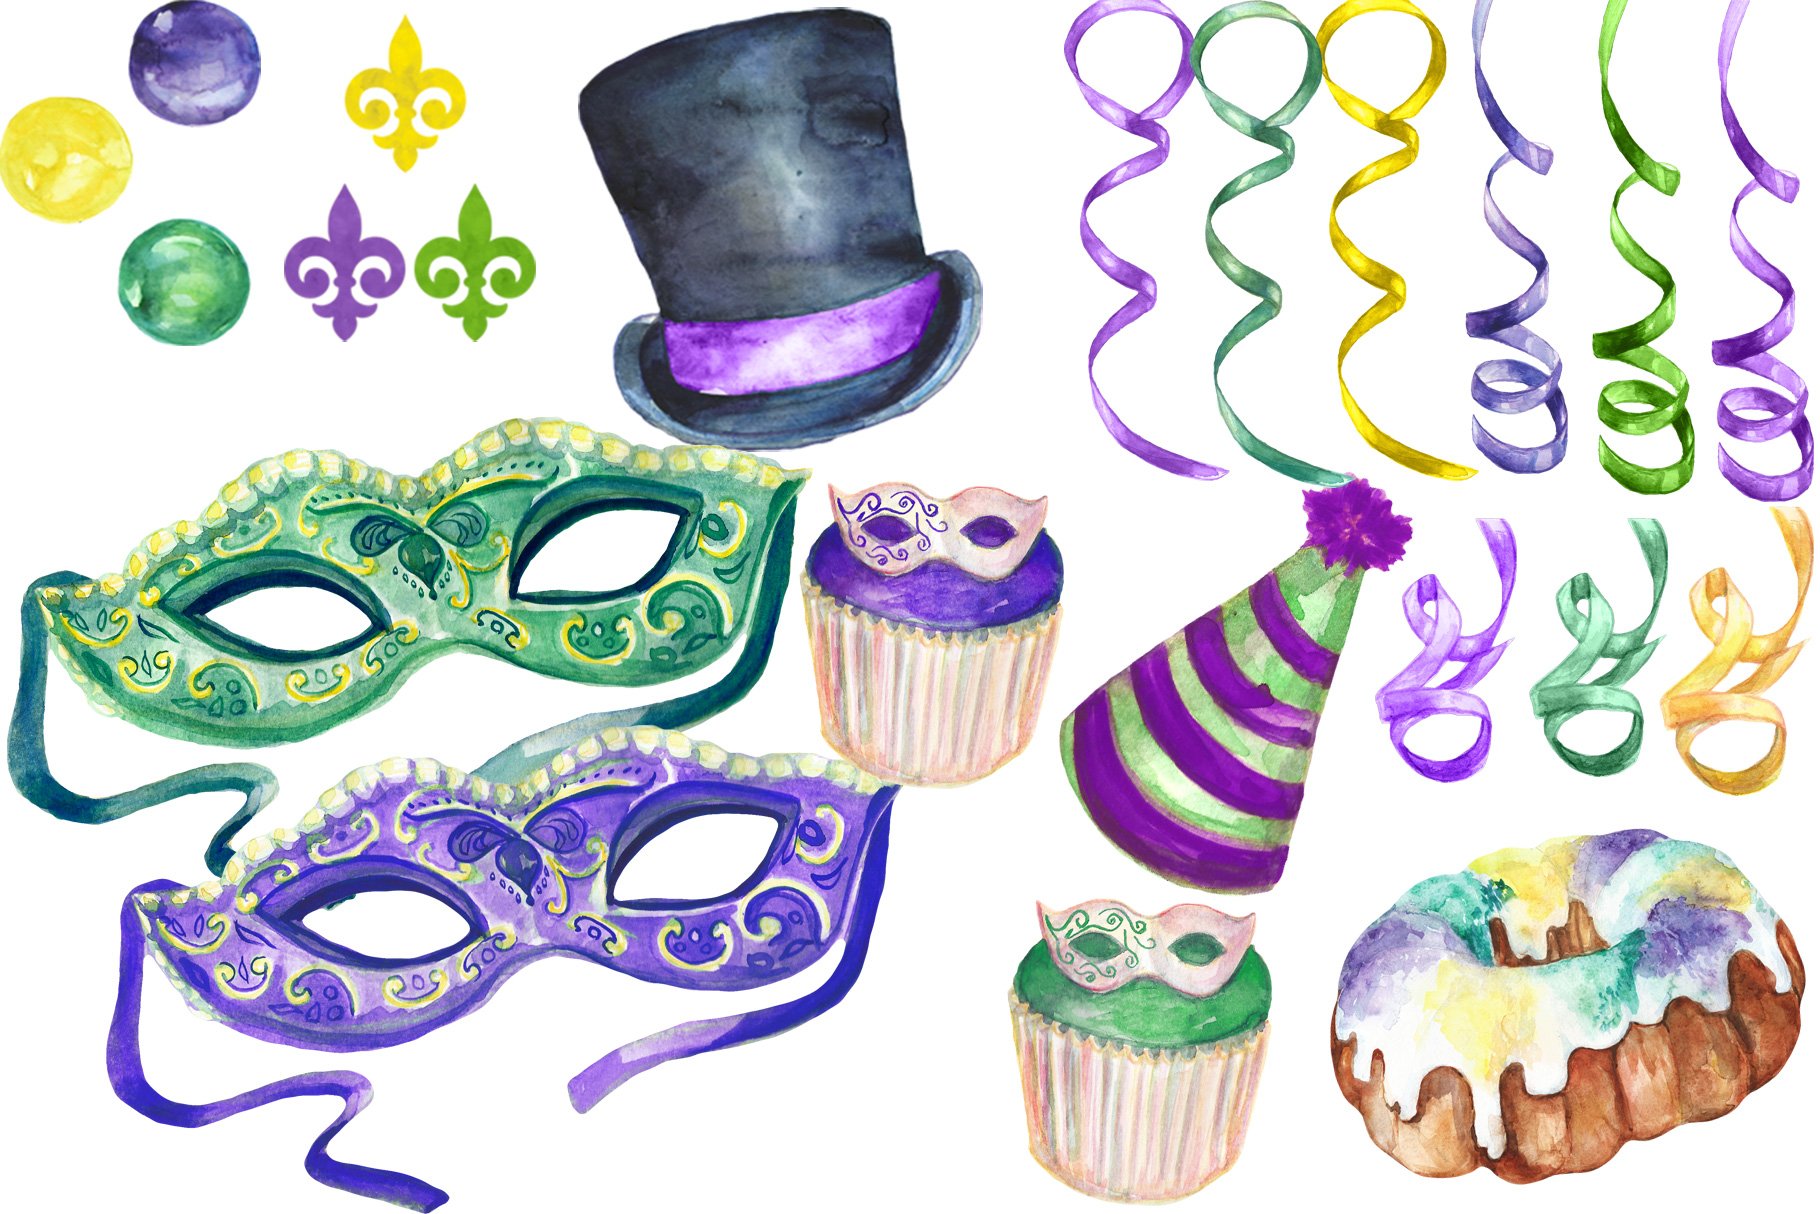 Lilac masks, confetti and other festive items.